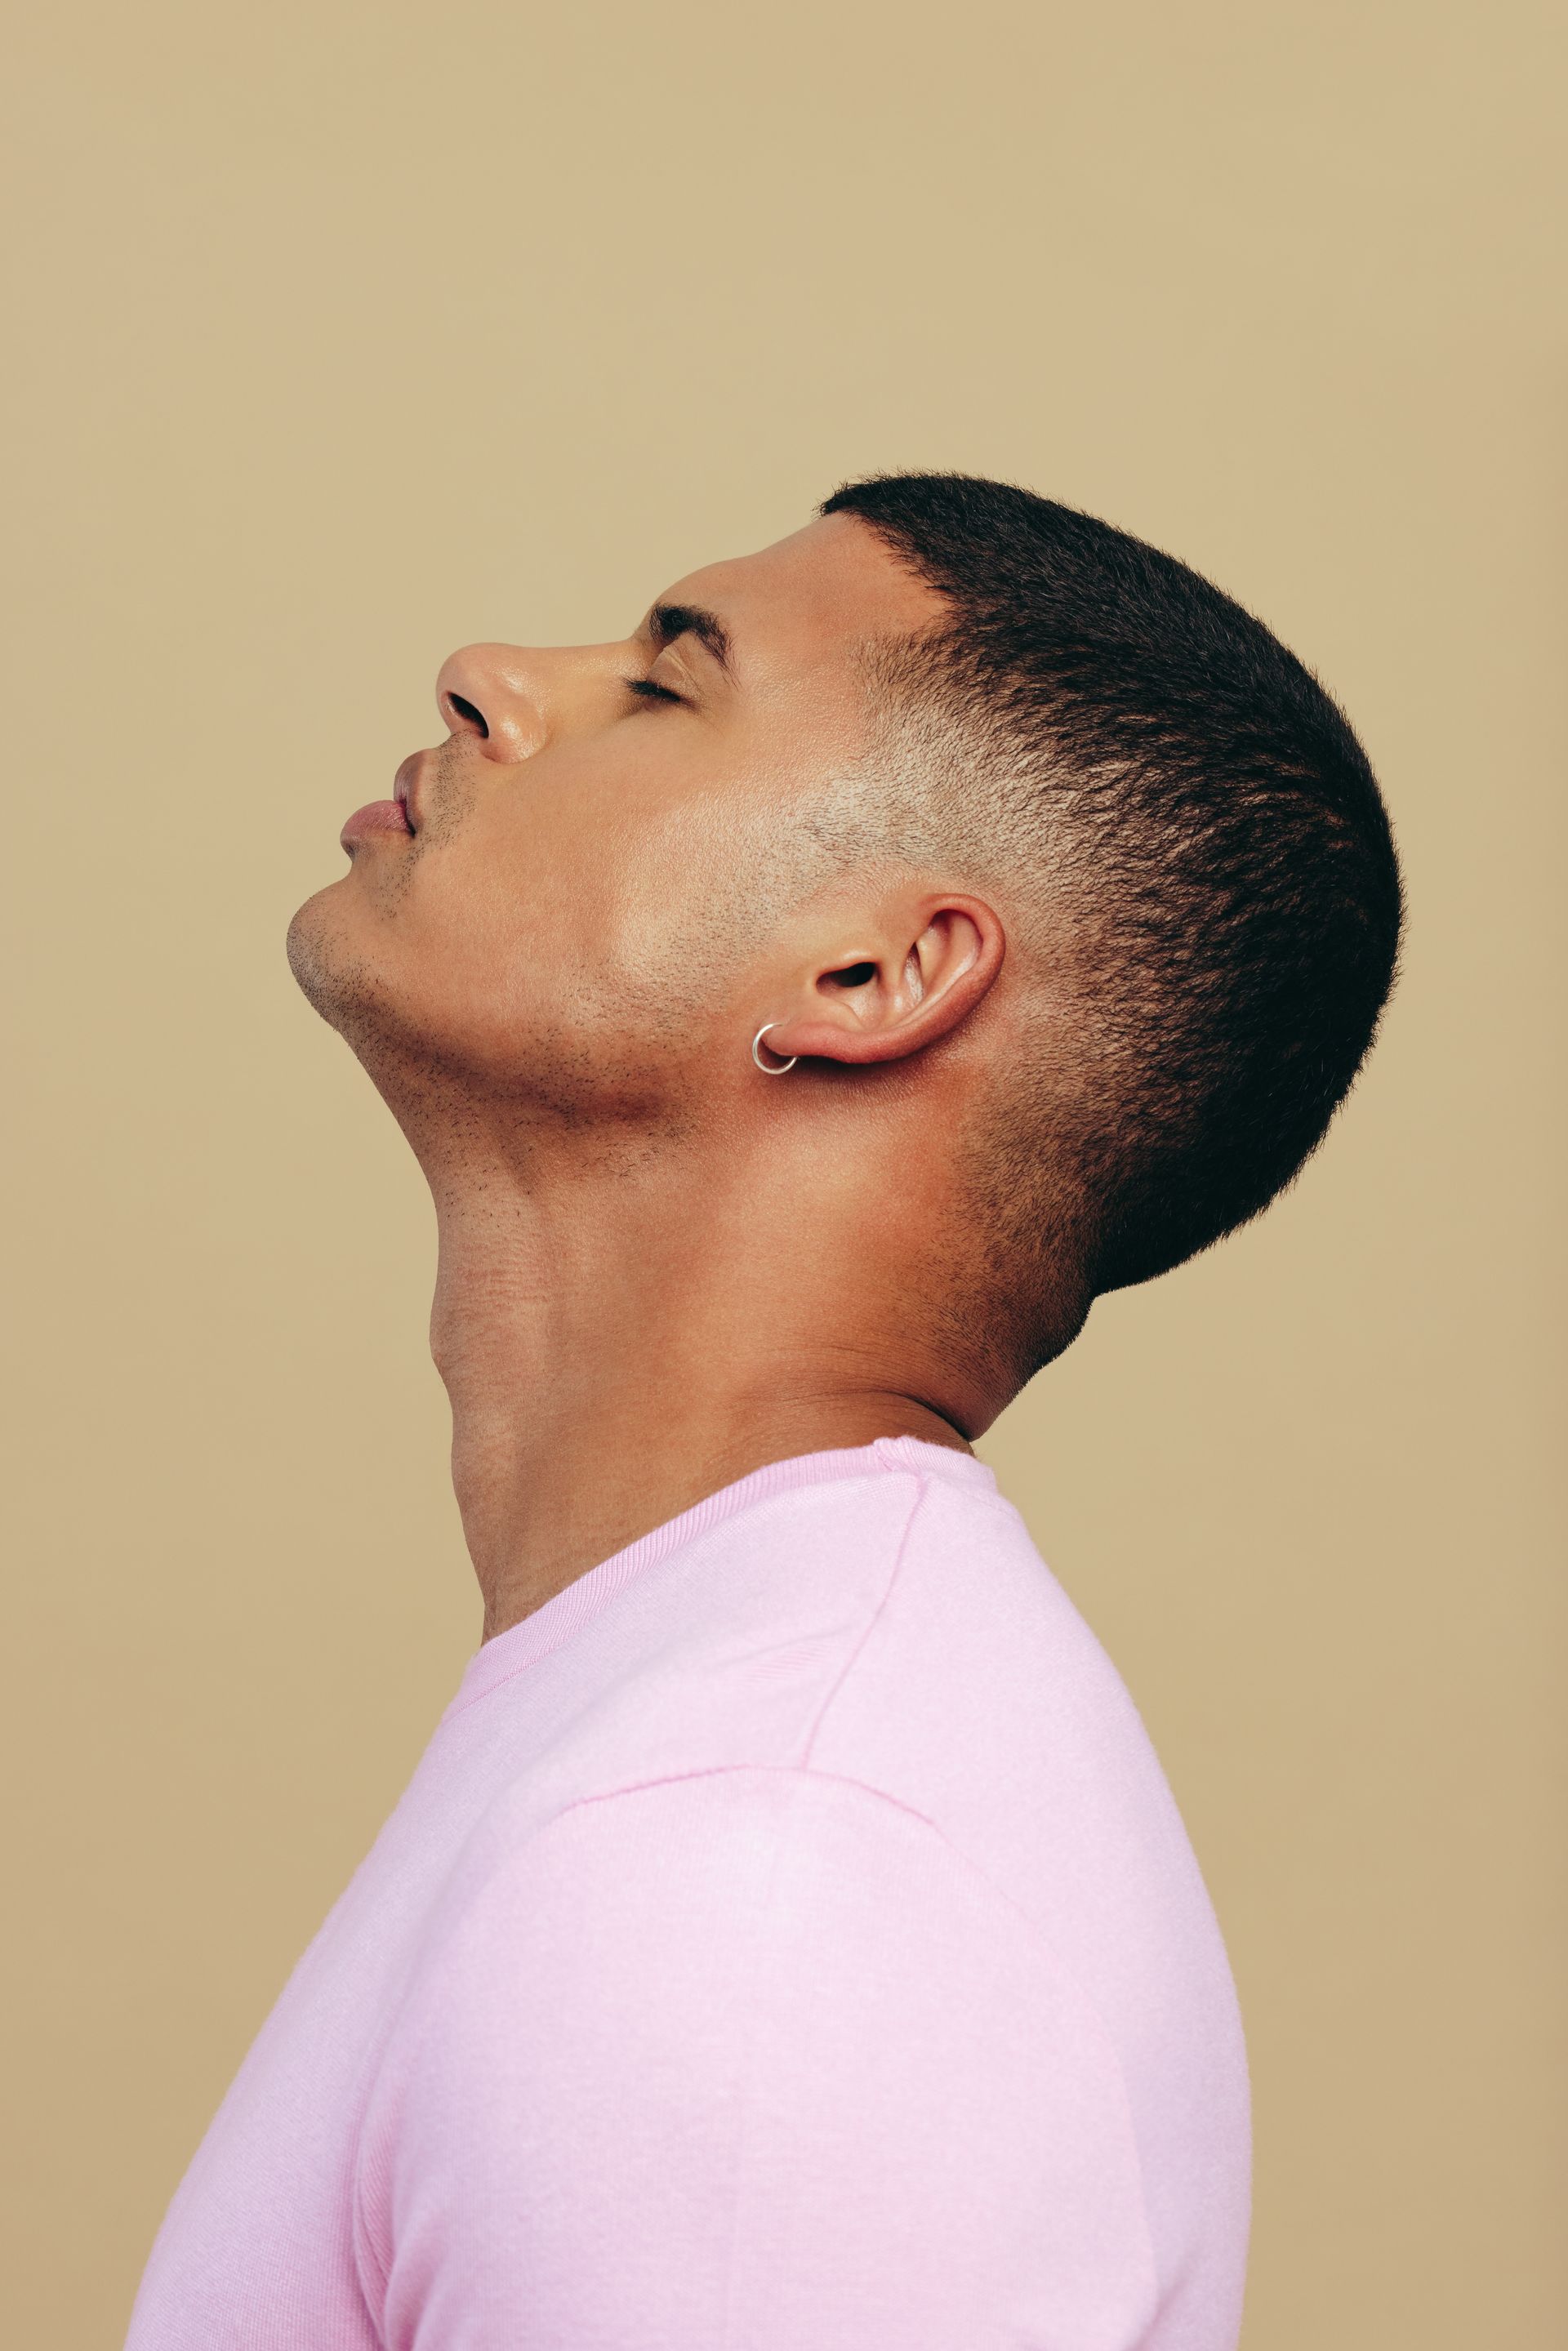 a man in a pink shirt has a piercing in his ear